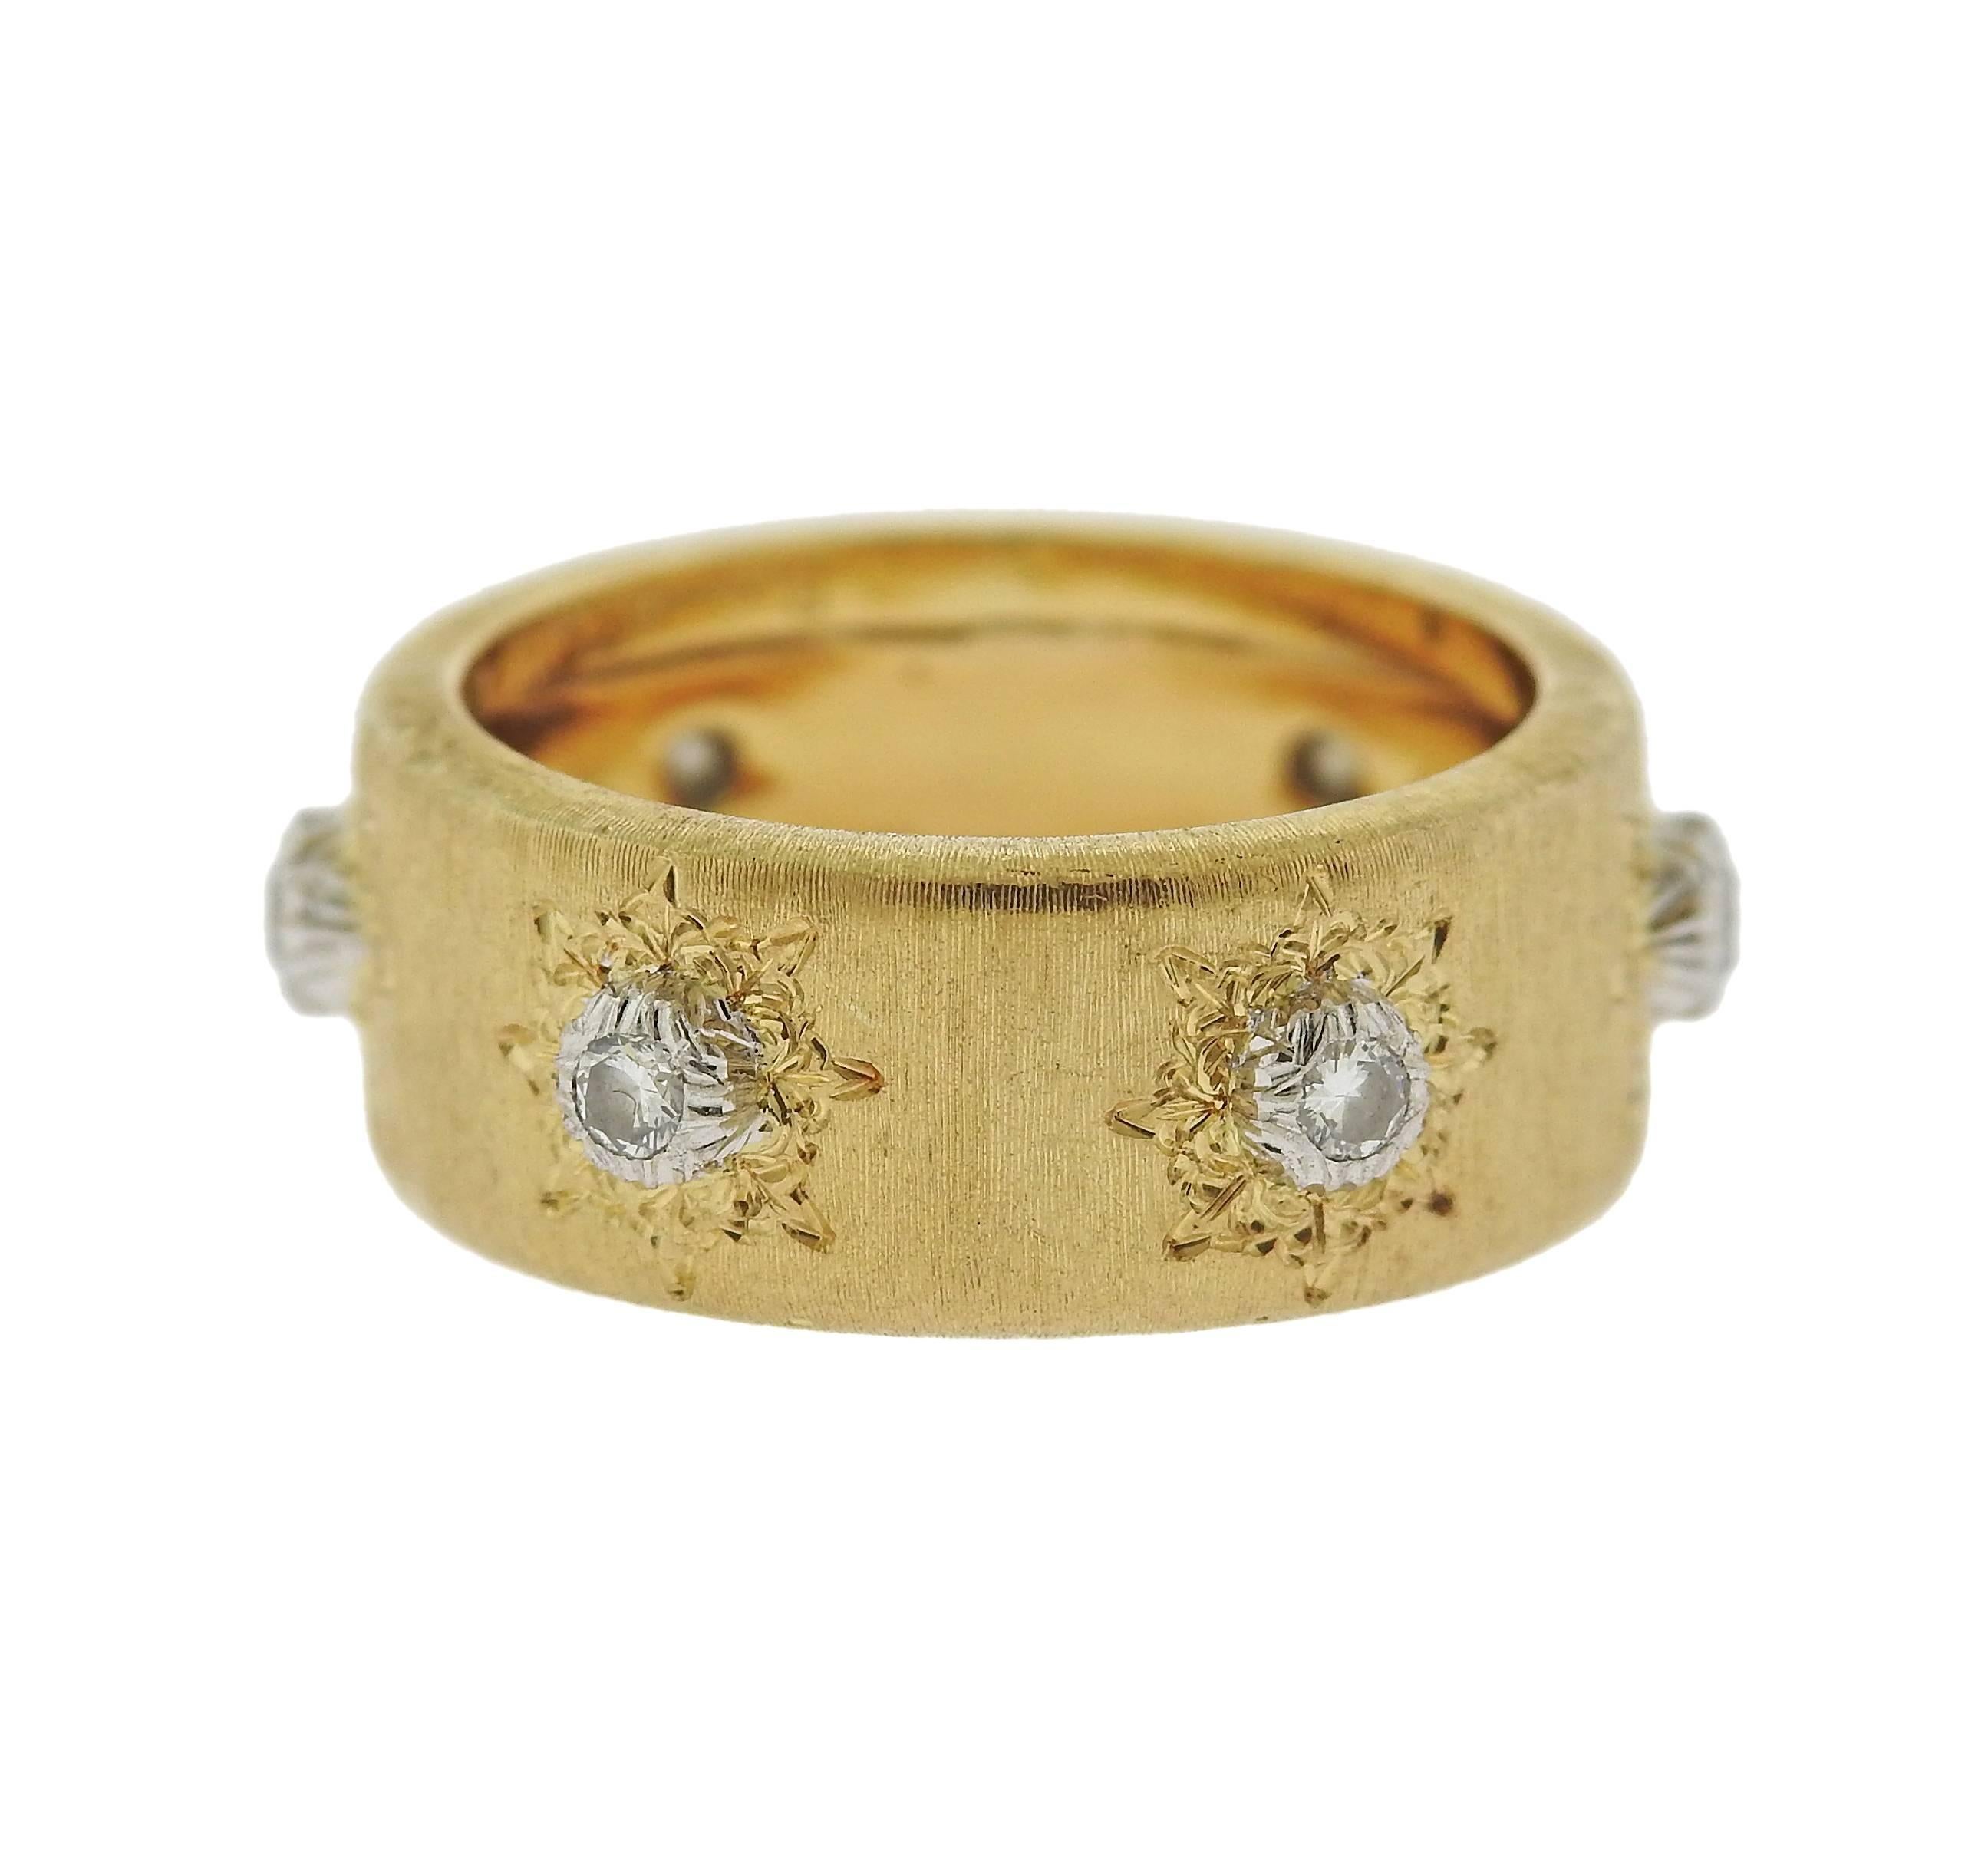 18k yellow gold wedding band ring, crafted by Buccellati, decorated with six H/VS diamonds. Ring size - 5.5, ring is 7.7mm wide , weight - 5.9 grams. Marked: 23250, Buccellati, Italy, 18k.